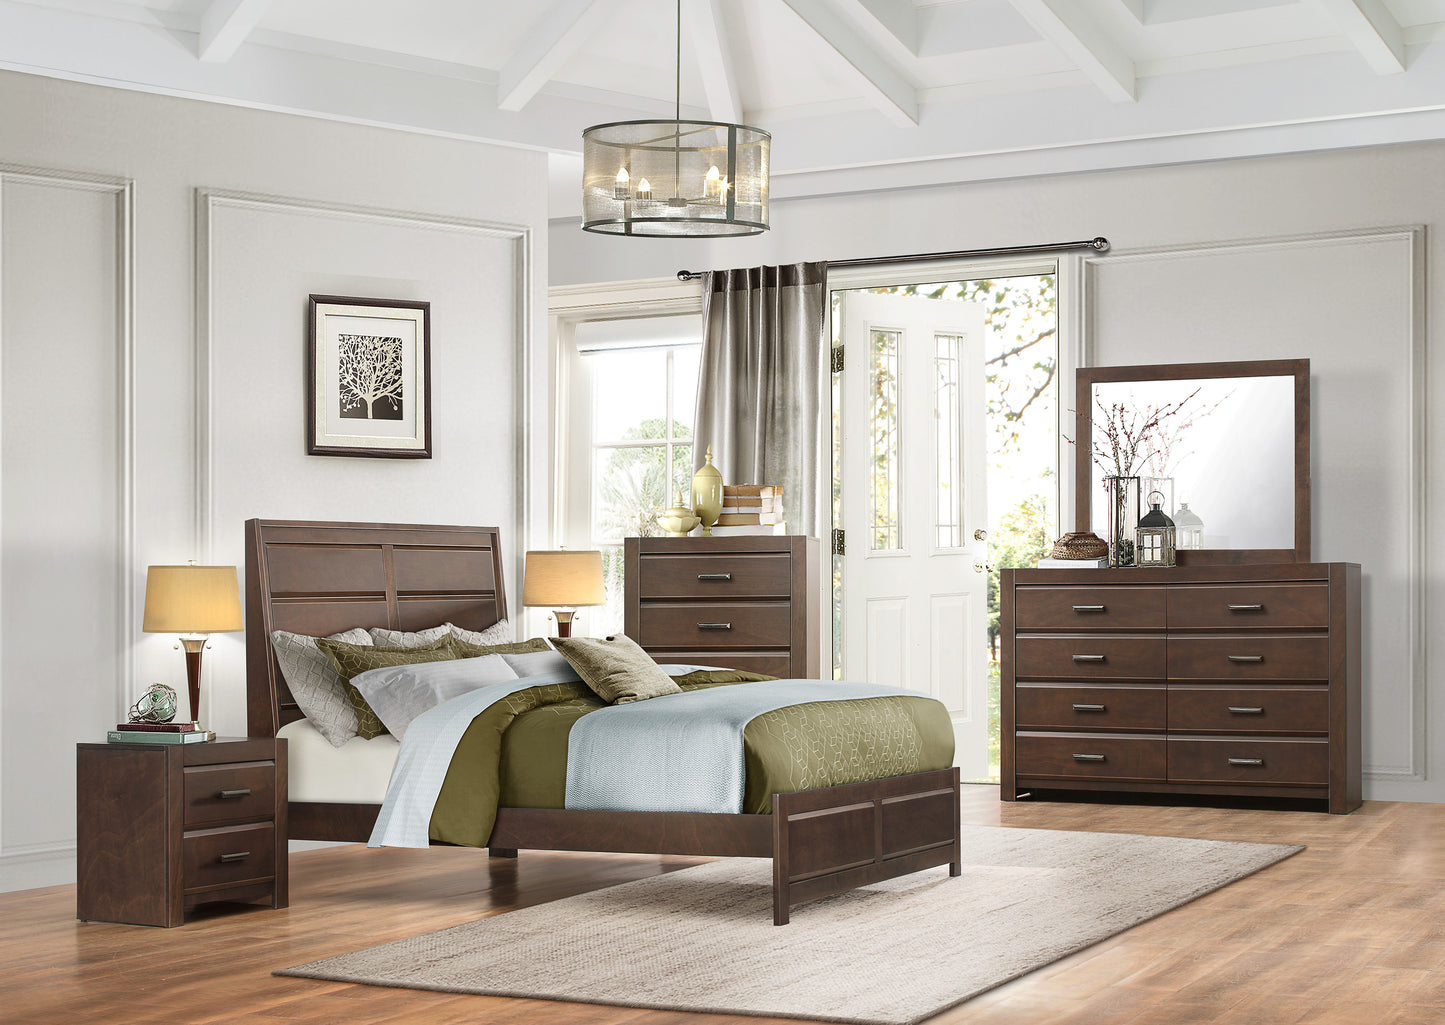 Earth 4PC Bedroom Set Cal King Panel Bed, Nightstand, Dresser, Mirror in Contemporary Brown